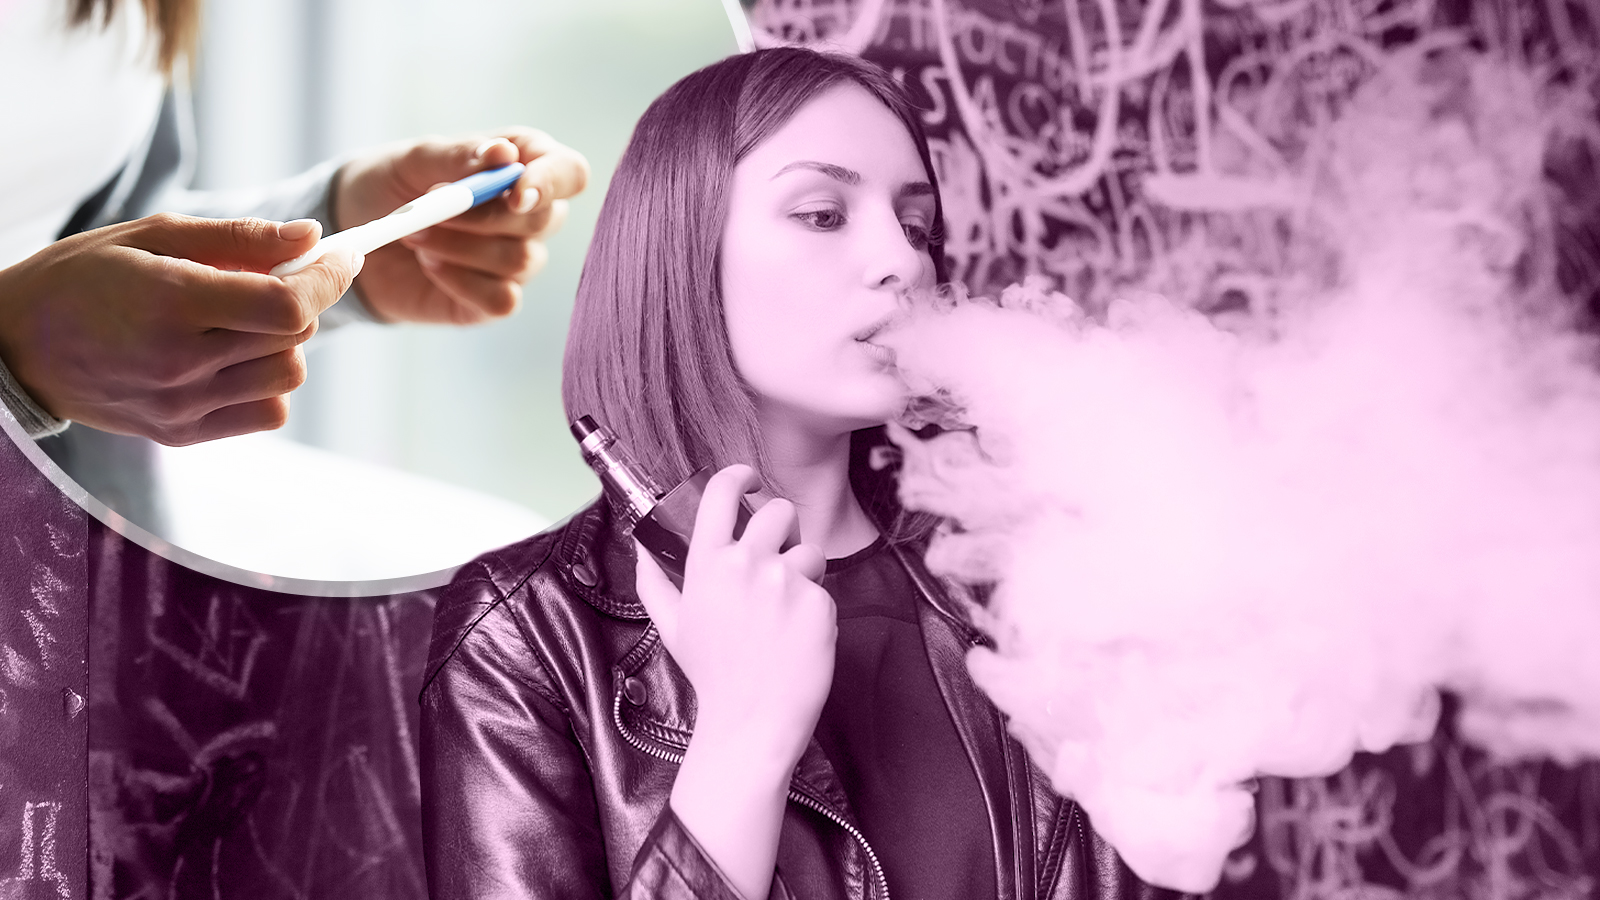 New research shows that women who vape have consistently lower levels of anti-mullerian hormone, a marker of fertility